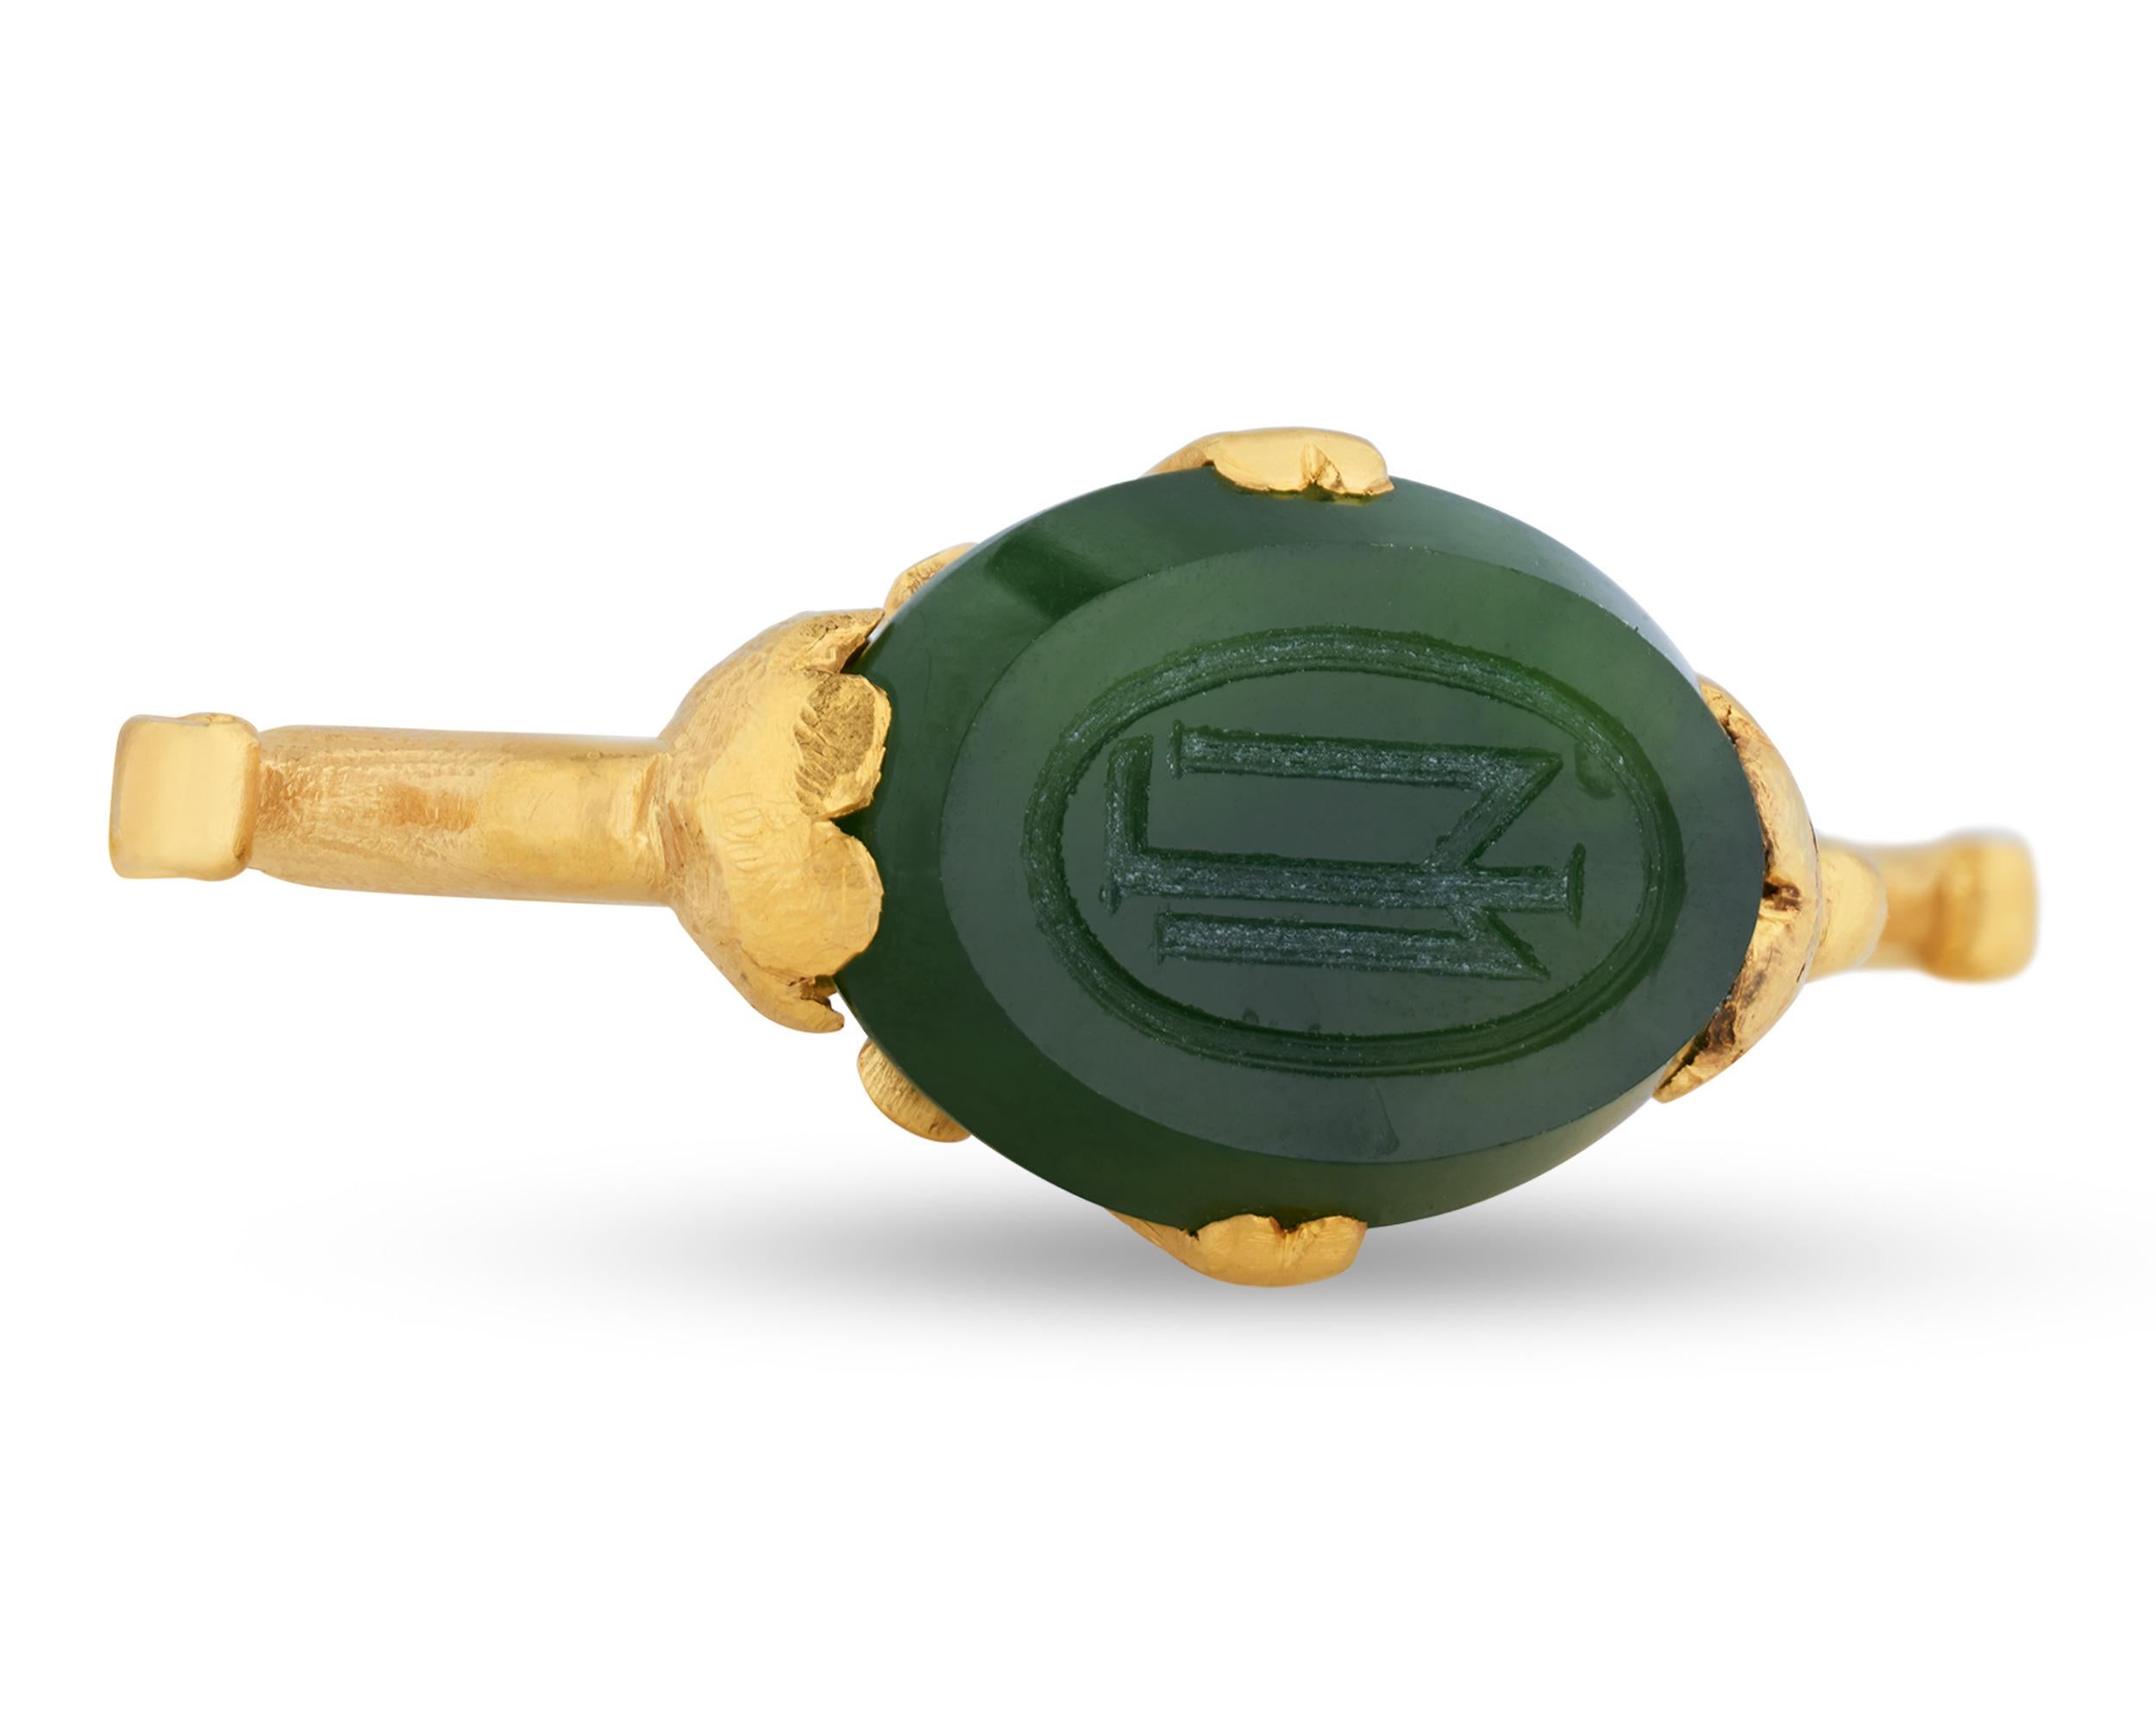 This inventive nephrite jade pendant crafted by famed jeweler Tiffany & Co. possesses the dual function as both a dazzling piece of jewelry and a seal. The verdant green specimen is incised with the letters 